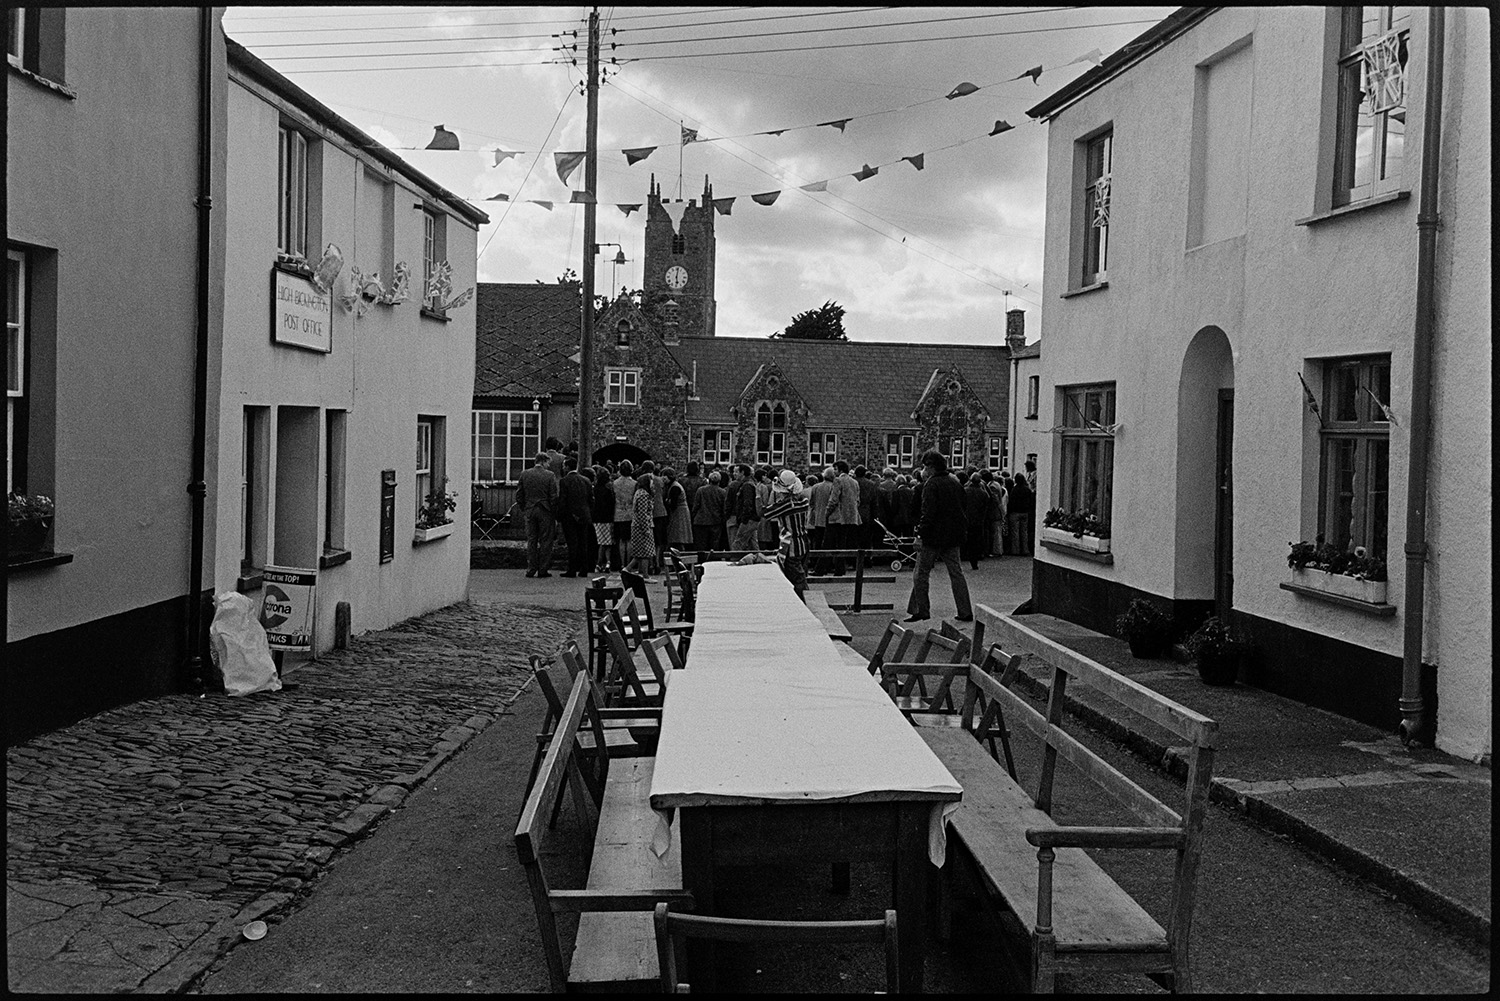 Empty tables in street after Jubilee tea, crowd watching dancing in background. 
[Empty trestle tables and chairs outside High Bickington Post Office after a tea to celebrate the Silver Jubilee of Queen Elizabeth II. The street is decorated with bunting. In the background a crowd is watching child Morris Dancers perform in front of High Bickington Primary School. High Bickington church tower and clock can be seen in the distance.]